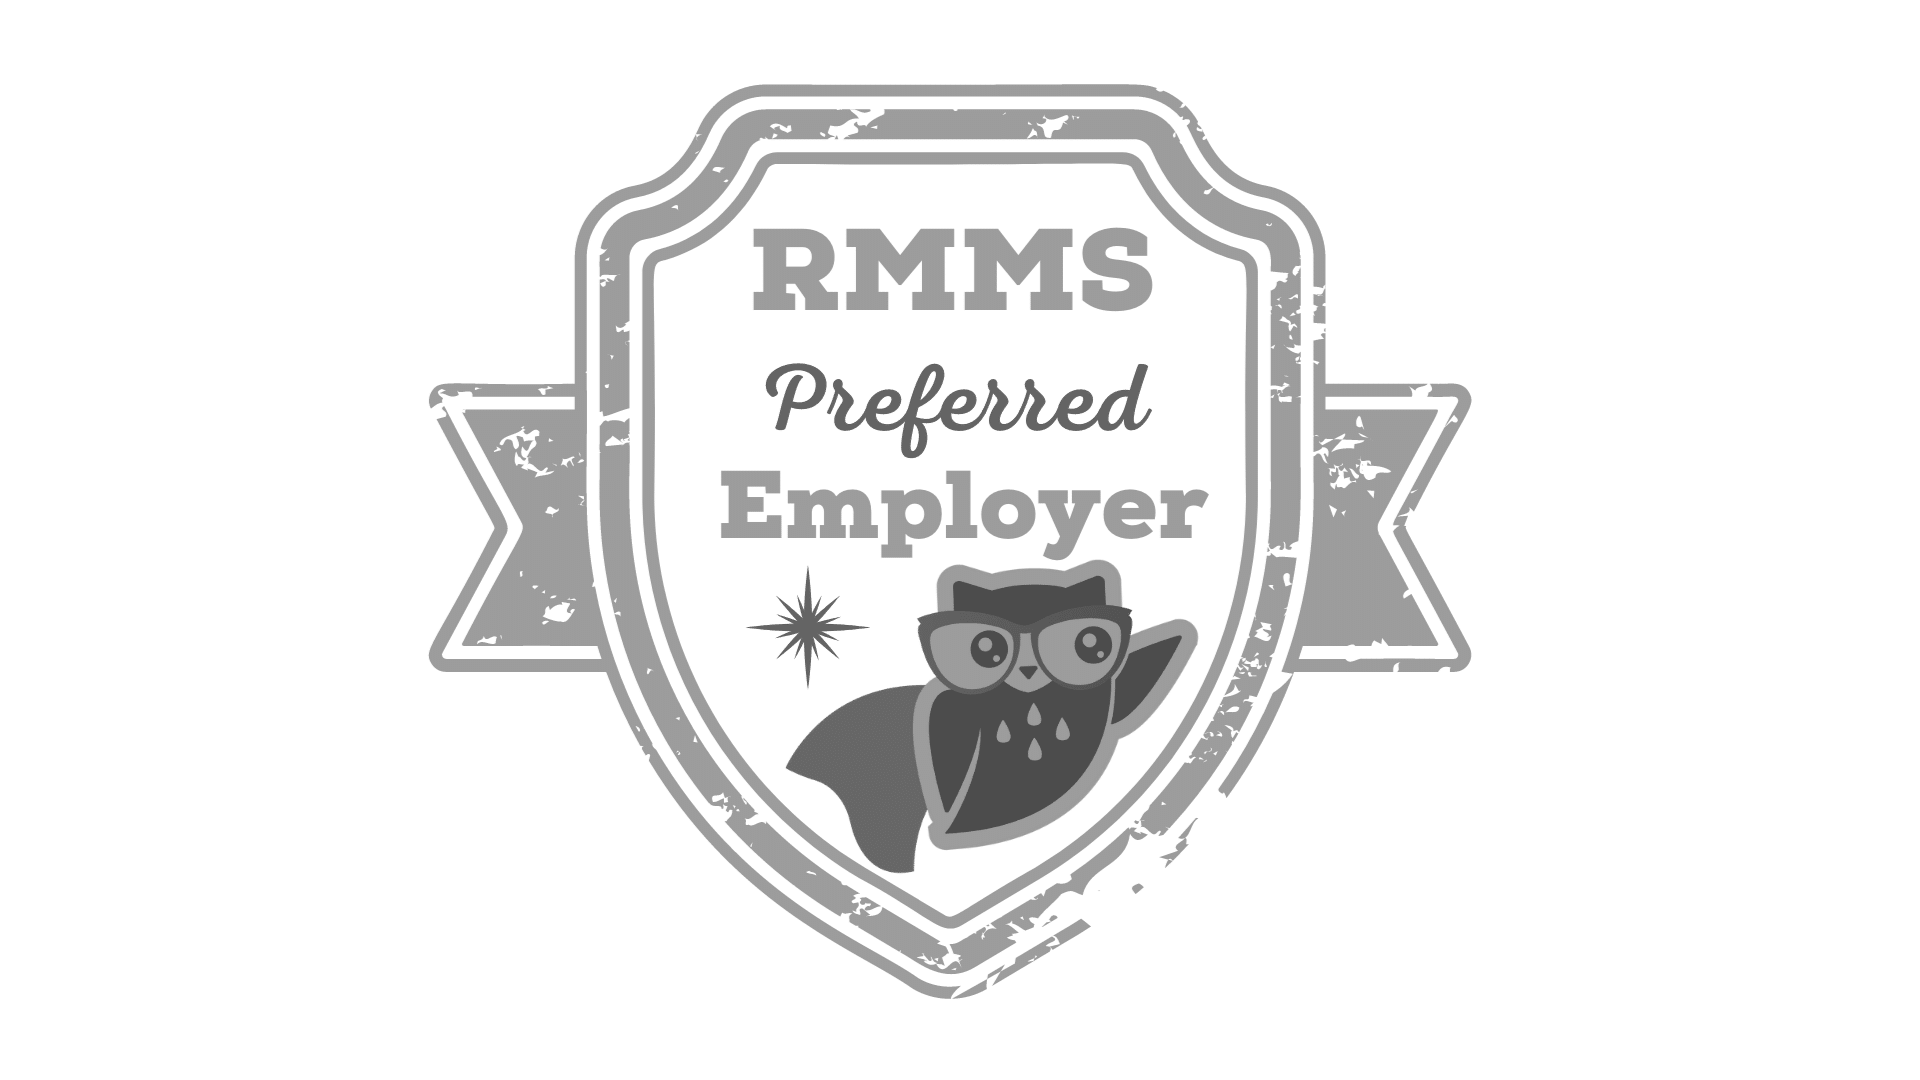 Rmms preferred employee for house cleaning services, showcasing our logo prominently.